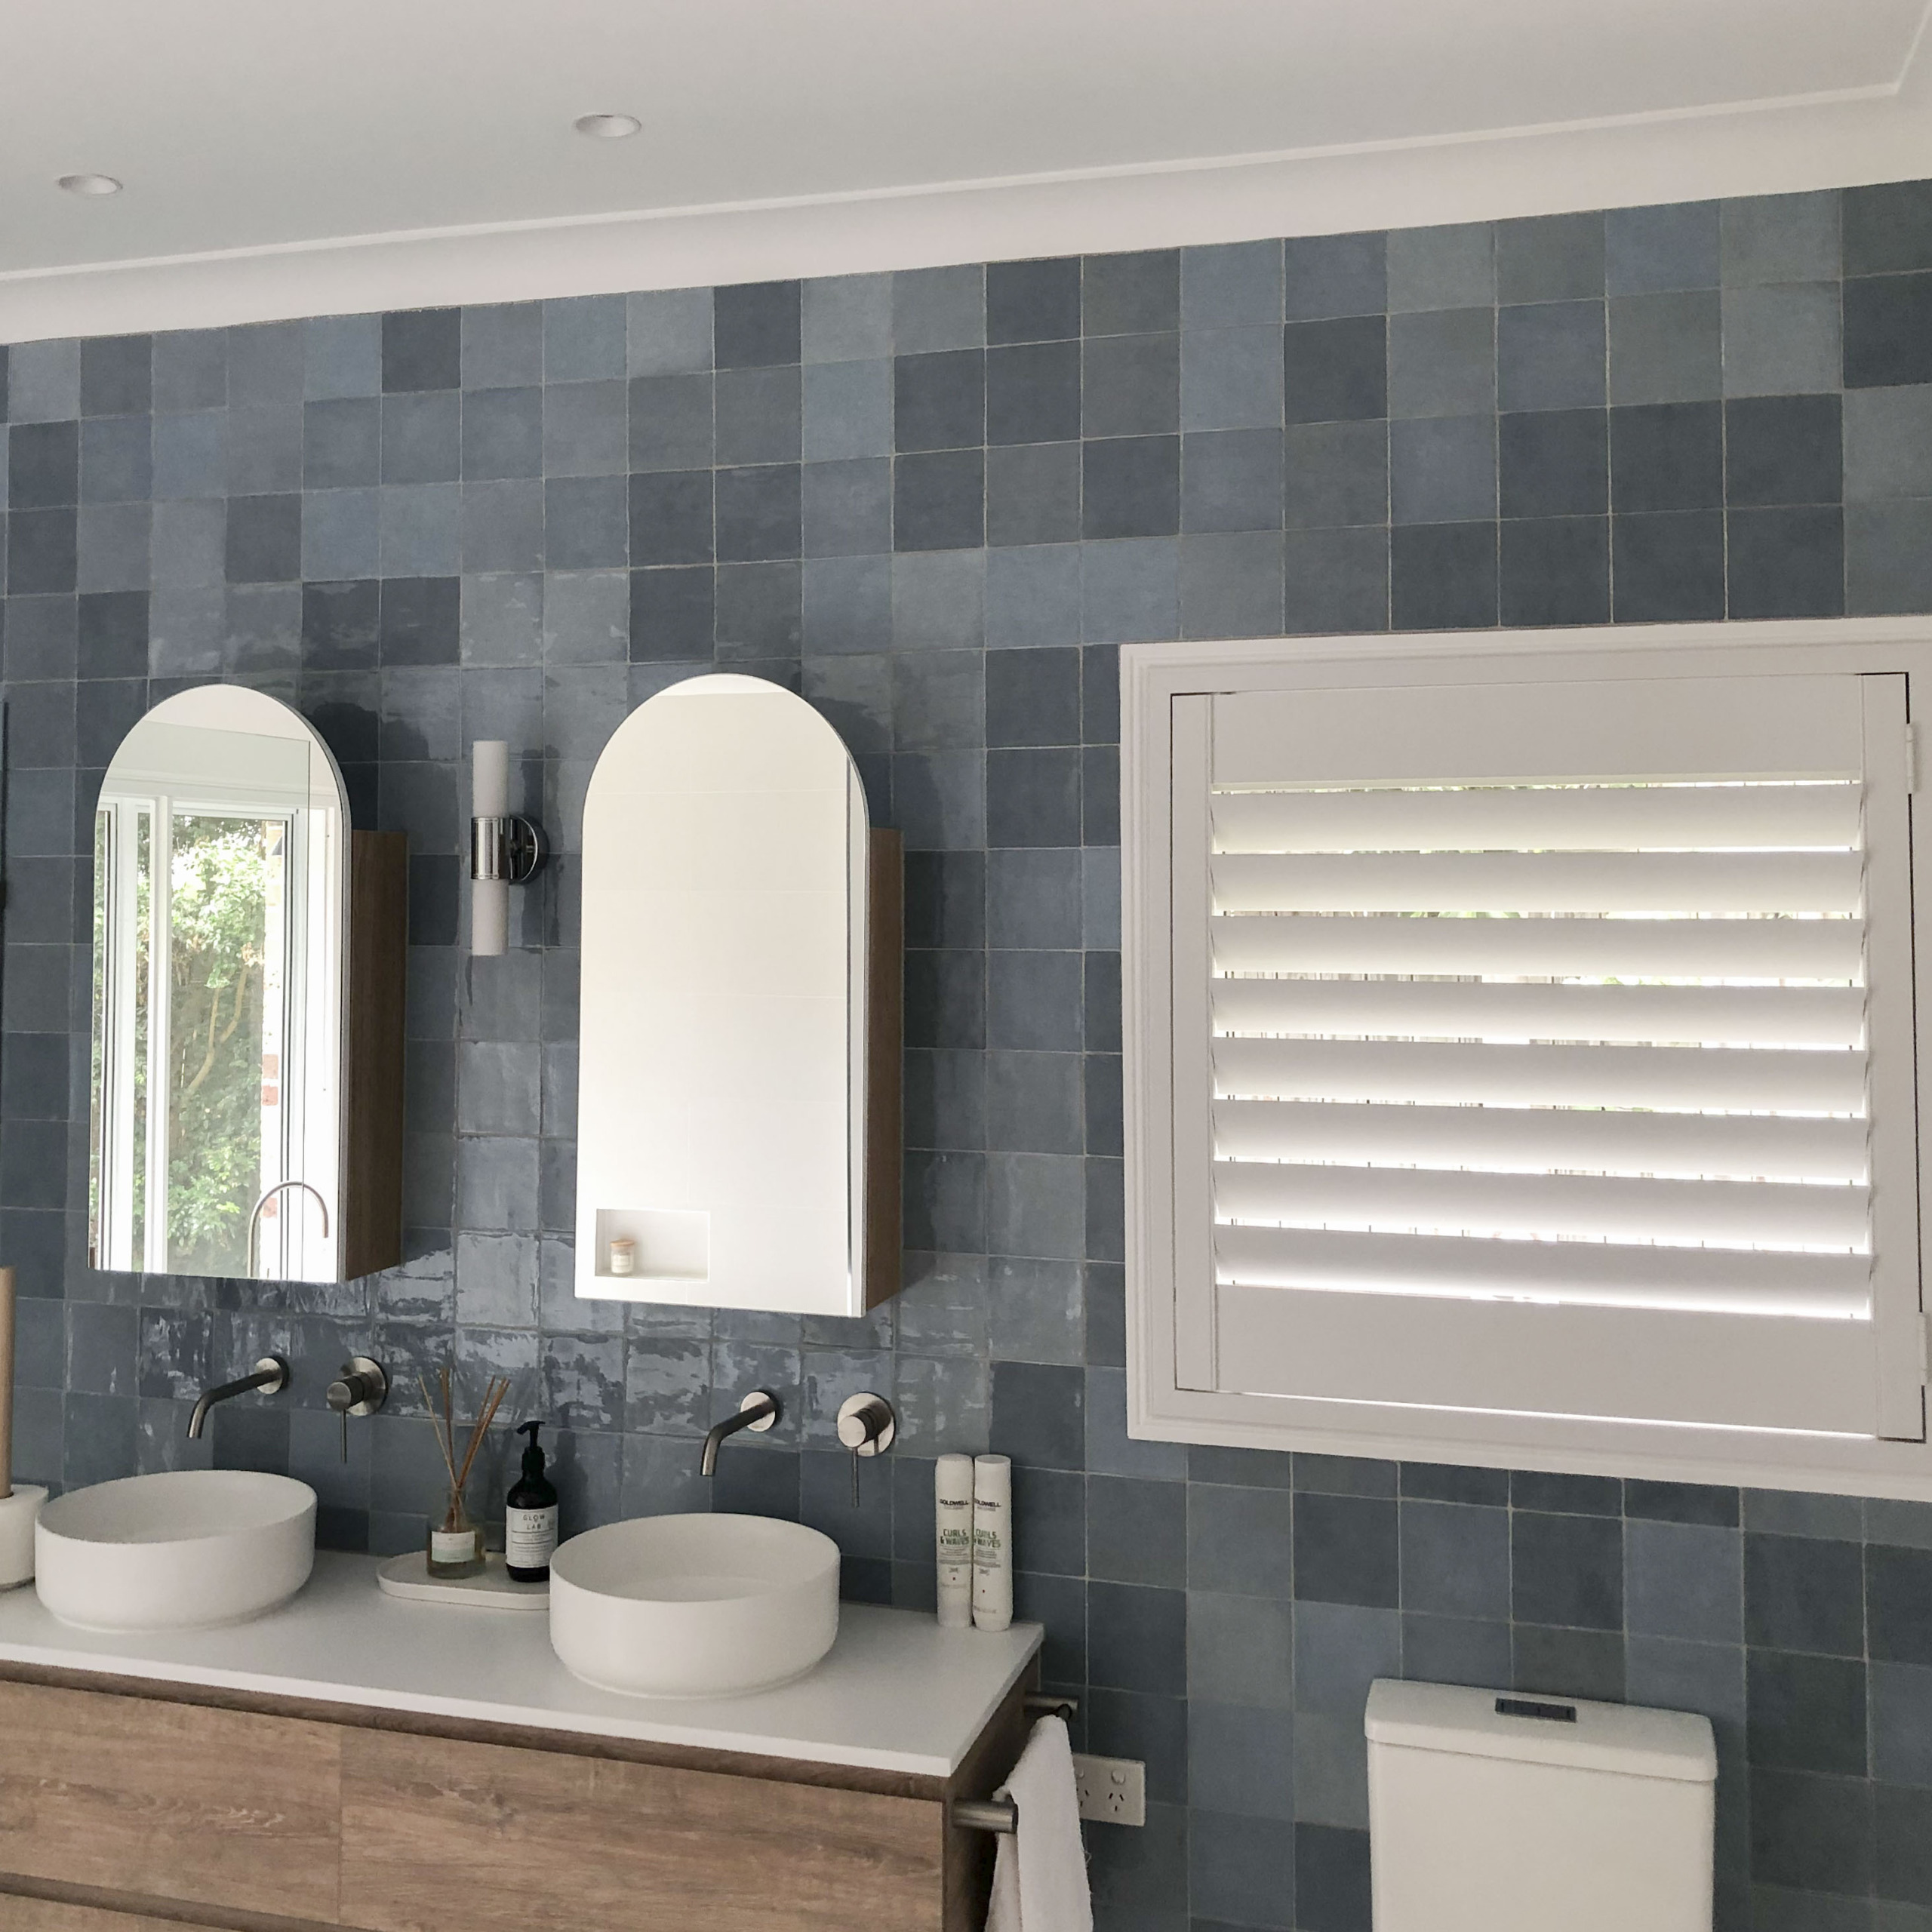 decor blinds bathroom thermalite shutters south east queensland